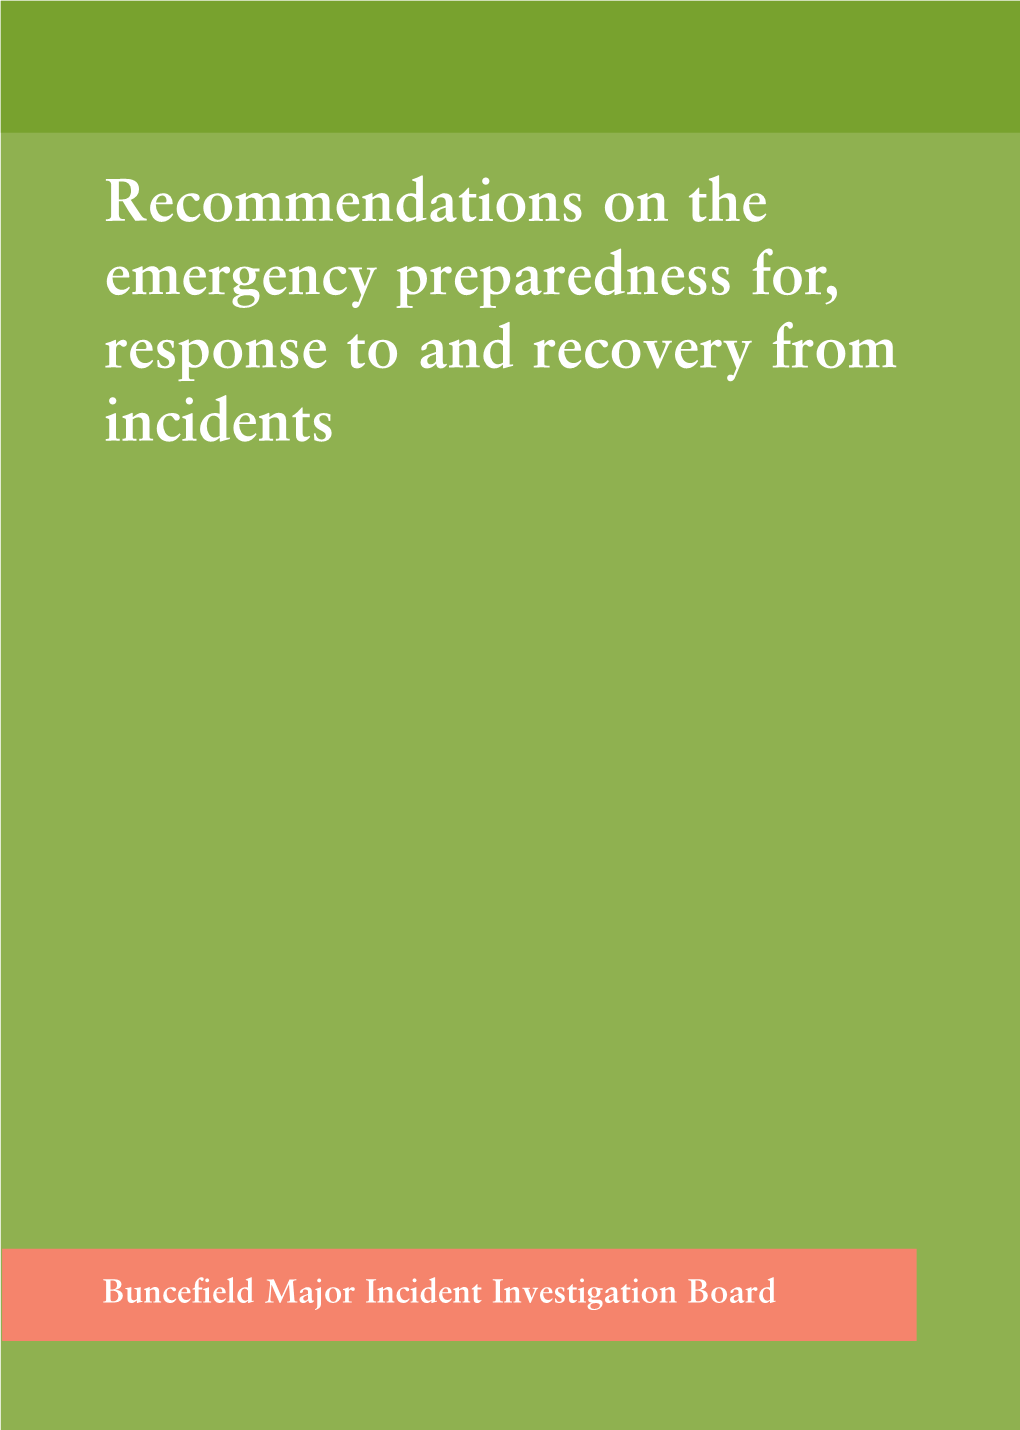 Recommendations on the Emergency Preparedness For, Response to and Recovery from Incidents